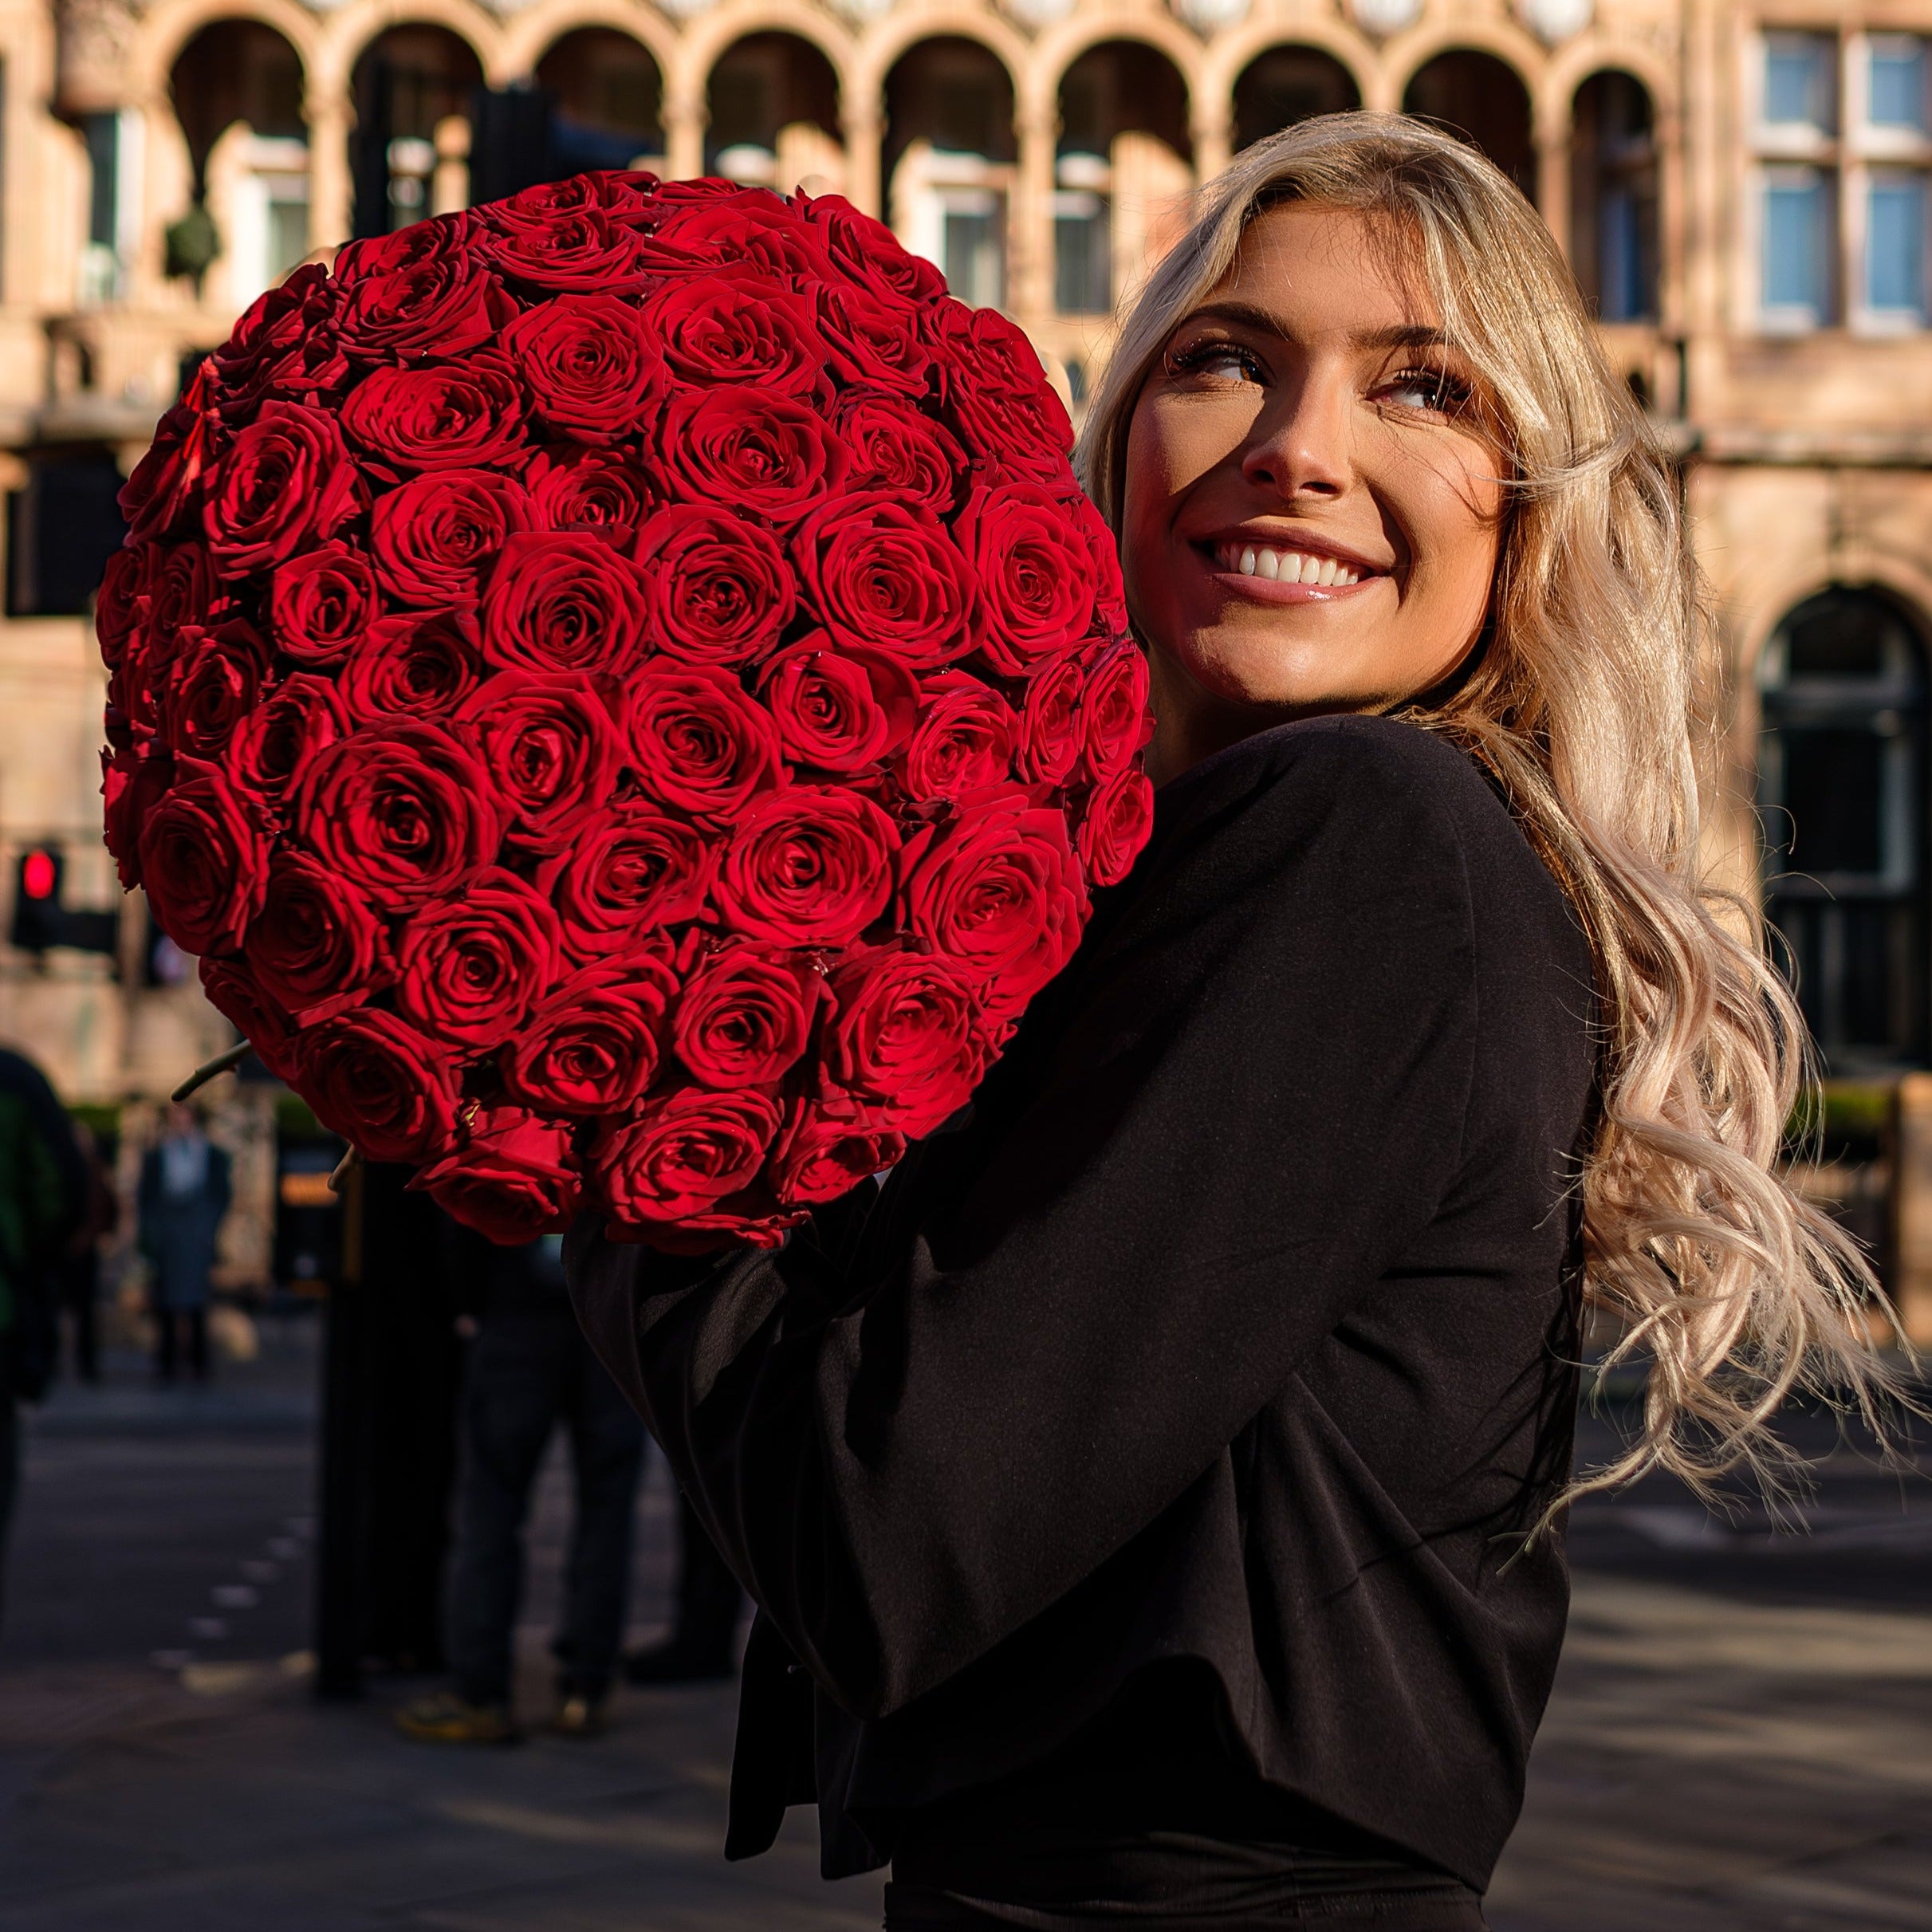 Exceptionally luxurious bouquet of bright red roses; each rose carefully selected for its vibrant colour and impressive size. The sheer number of roses creates a stunning visual impact, with the blooms densely arranged to form a perfect sphere. This meticulous design showcases the roses in full glory, emphasizing their lush, velvety petals which are synonymous with passion and love. Bouquet sizes are from 12 to 200 red roses.